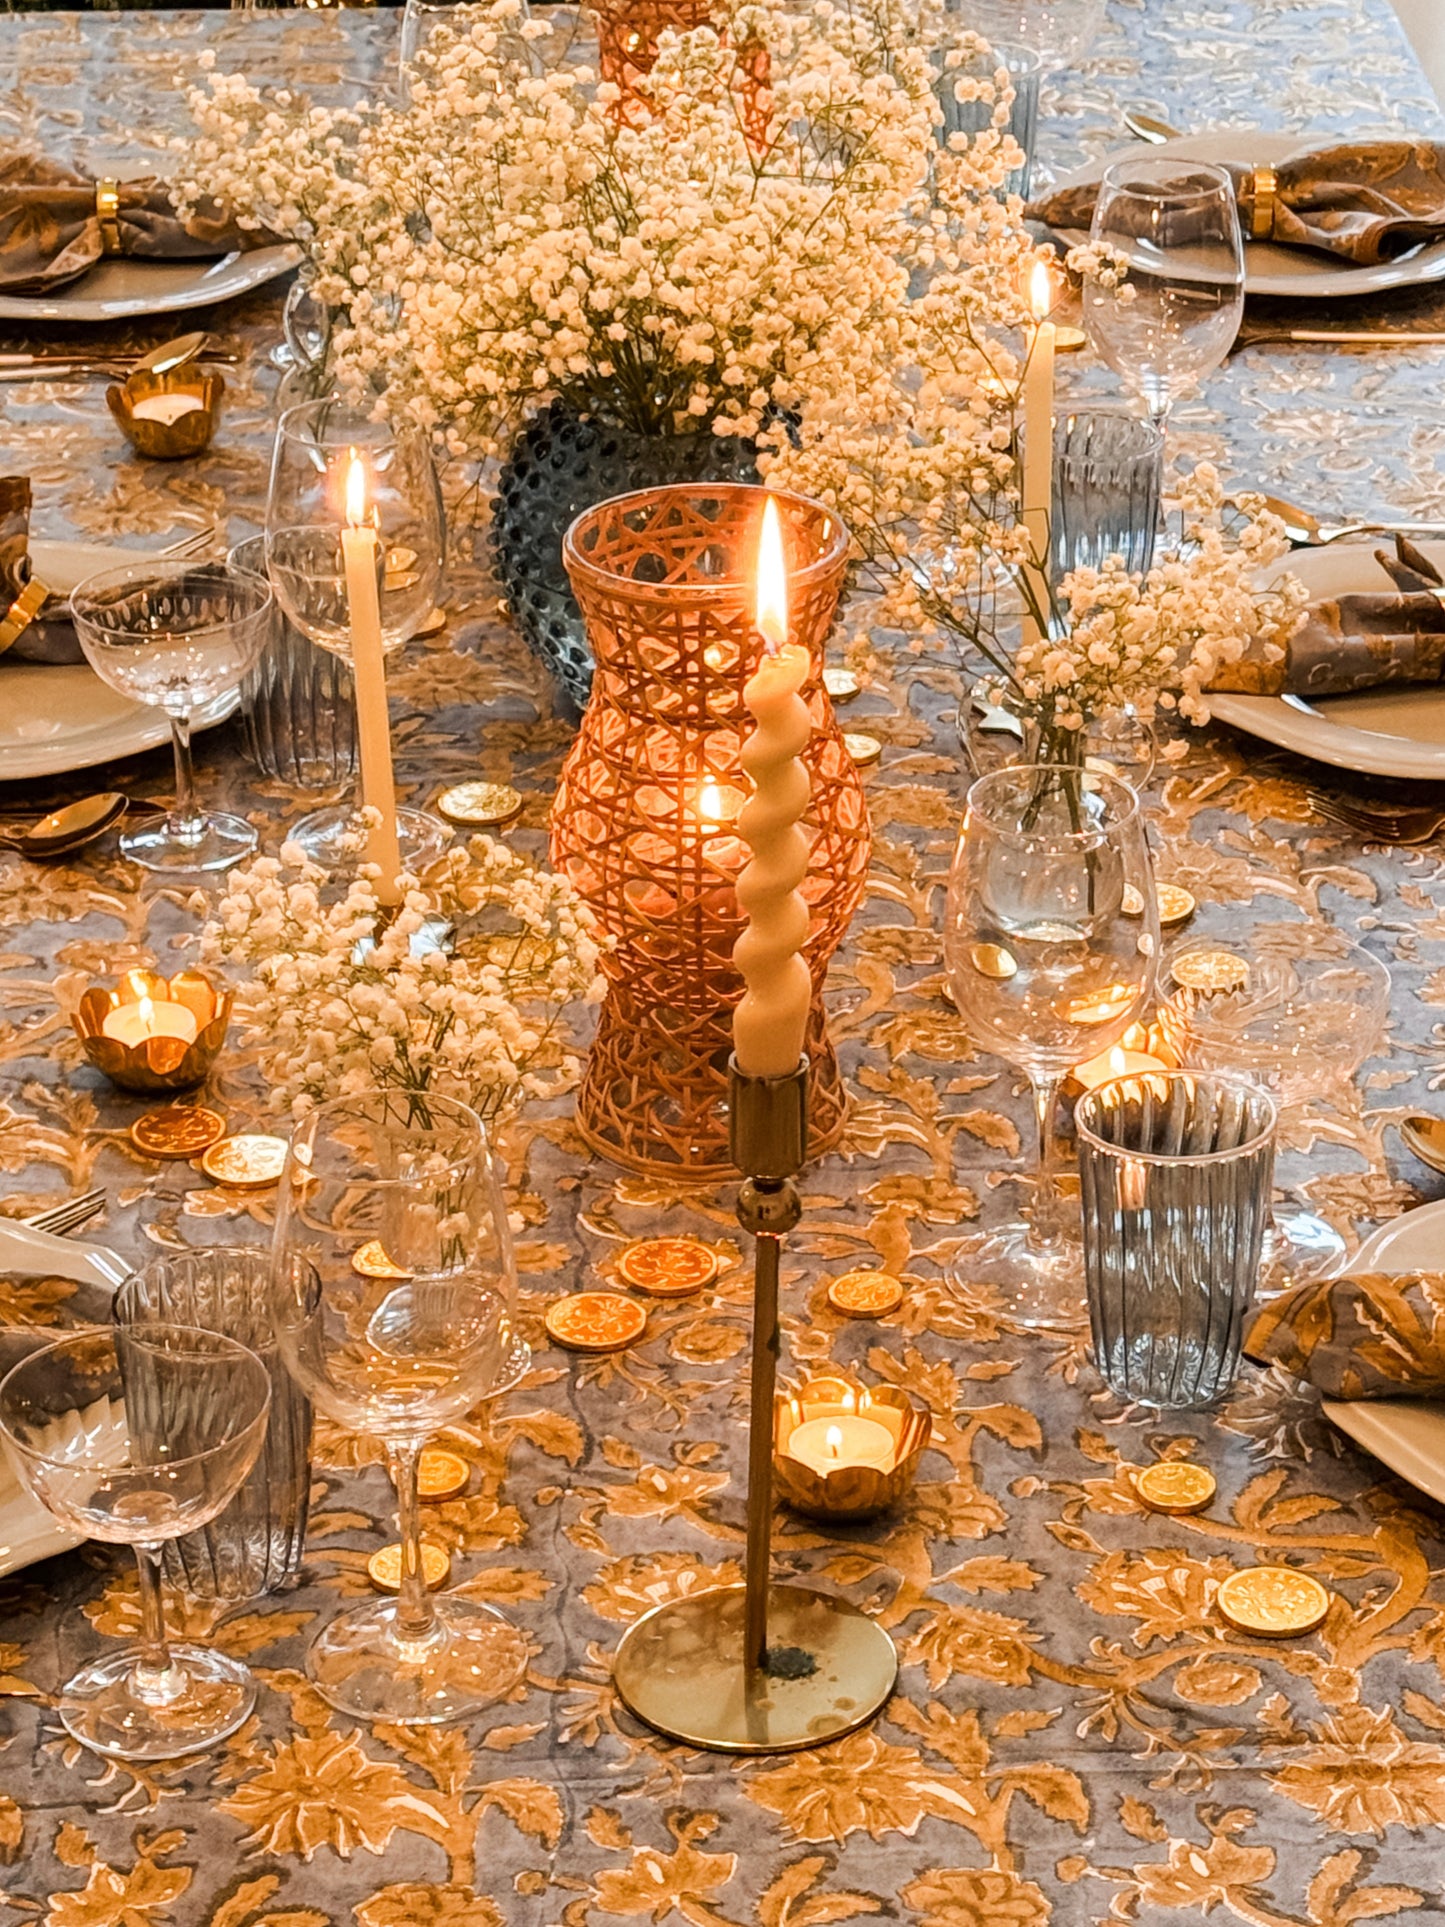 Fields of Gold Tablecloth